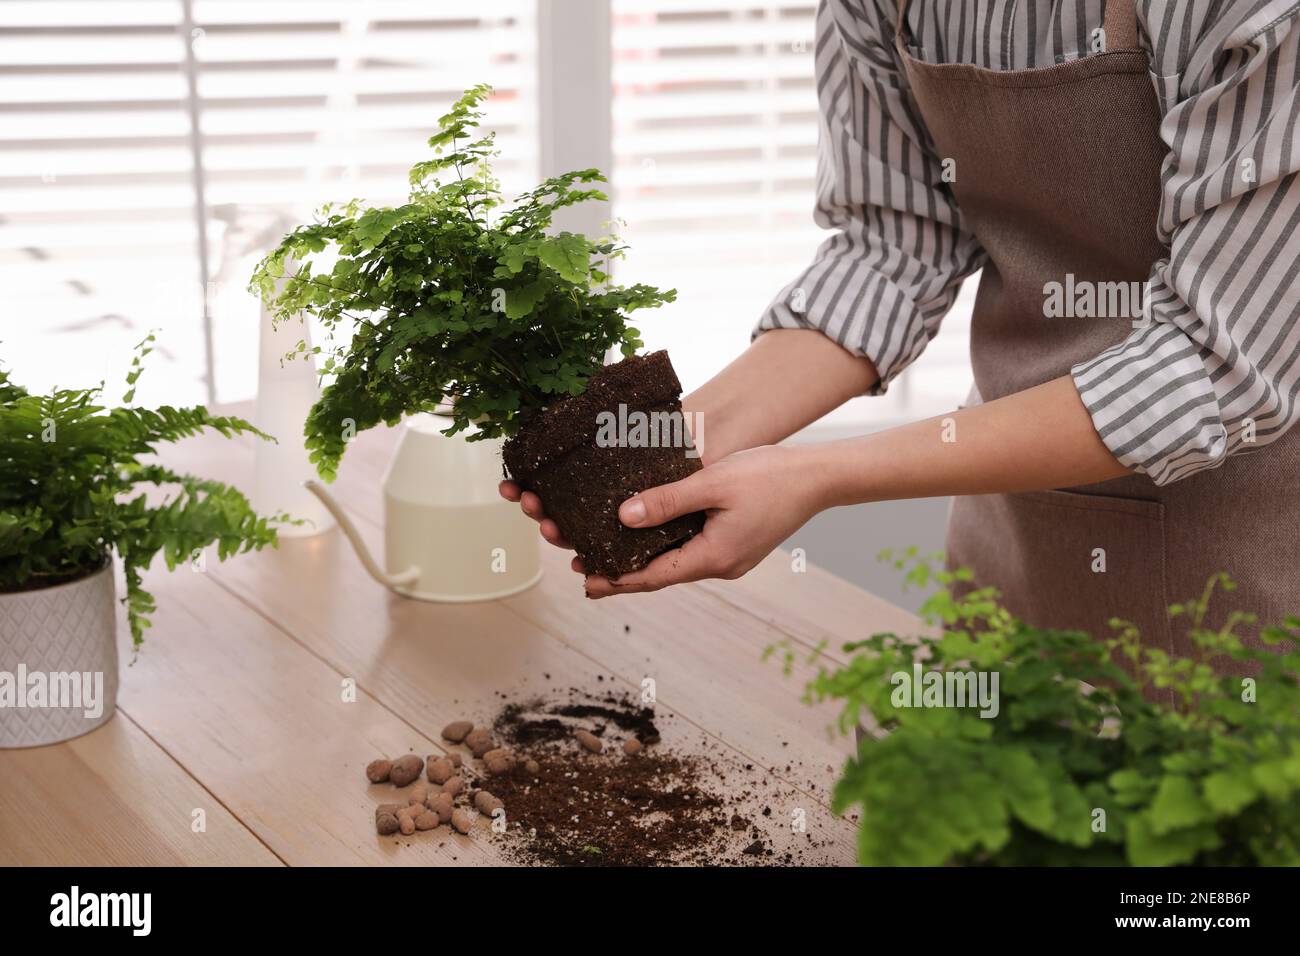 Woman holding fern at wooden table, closeup Stock Photo